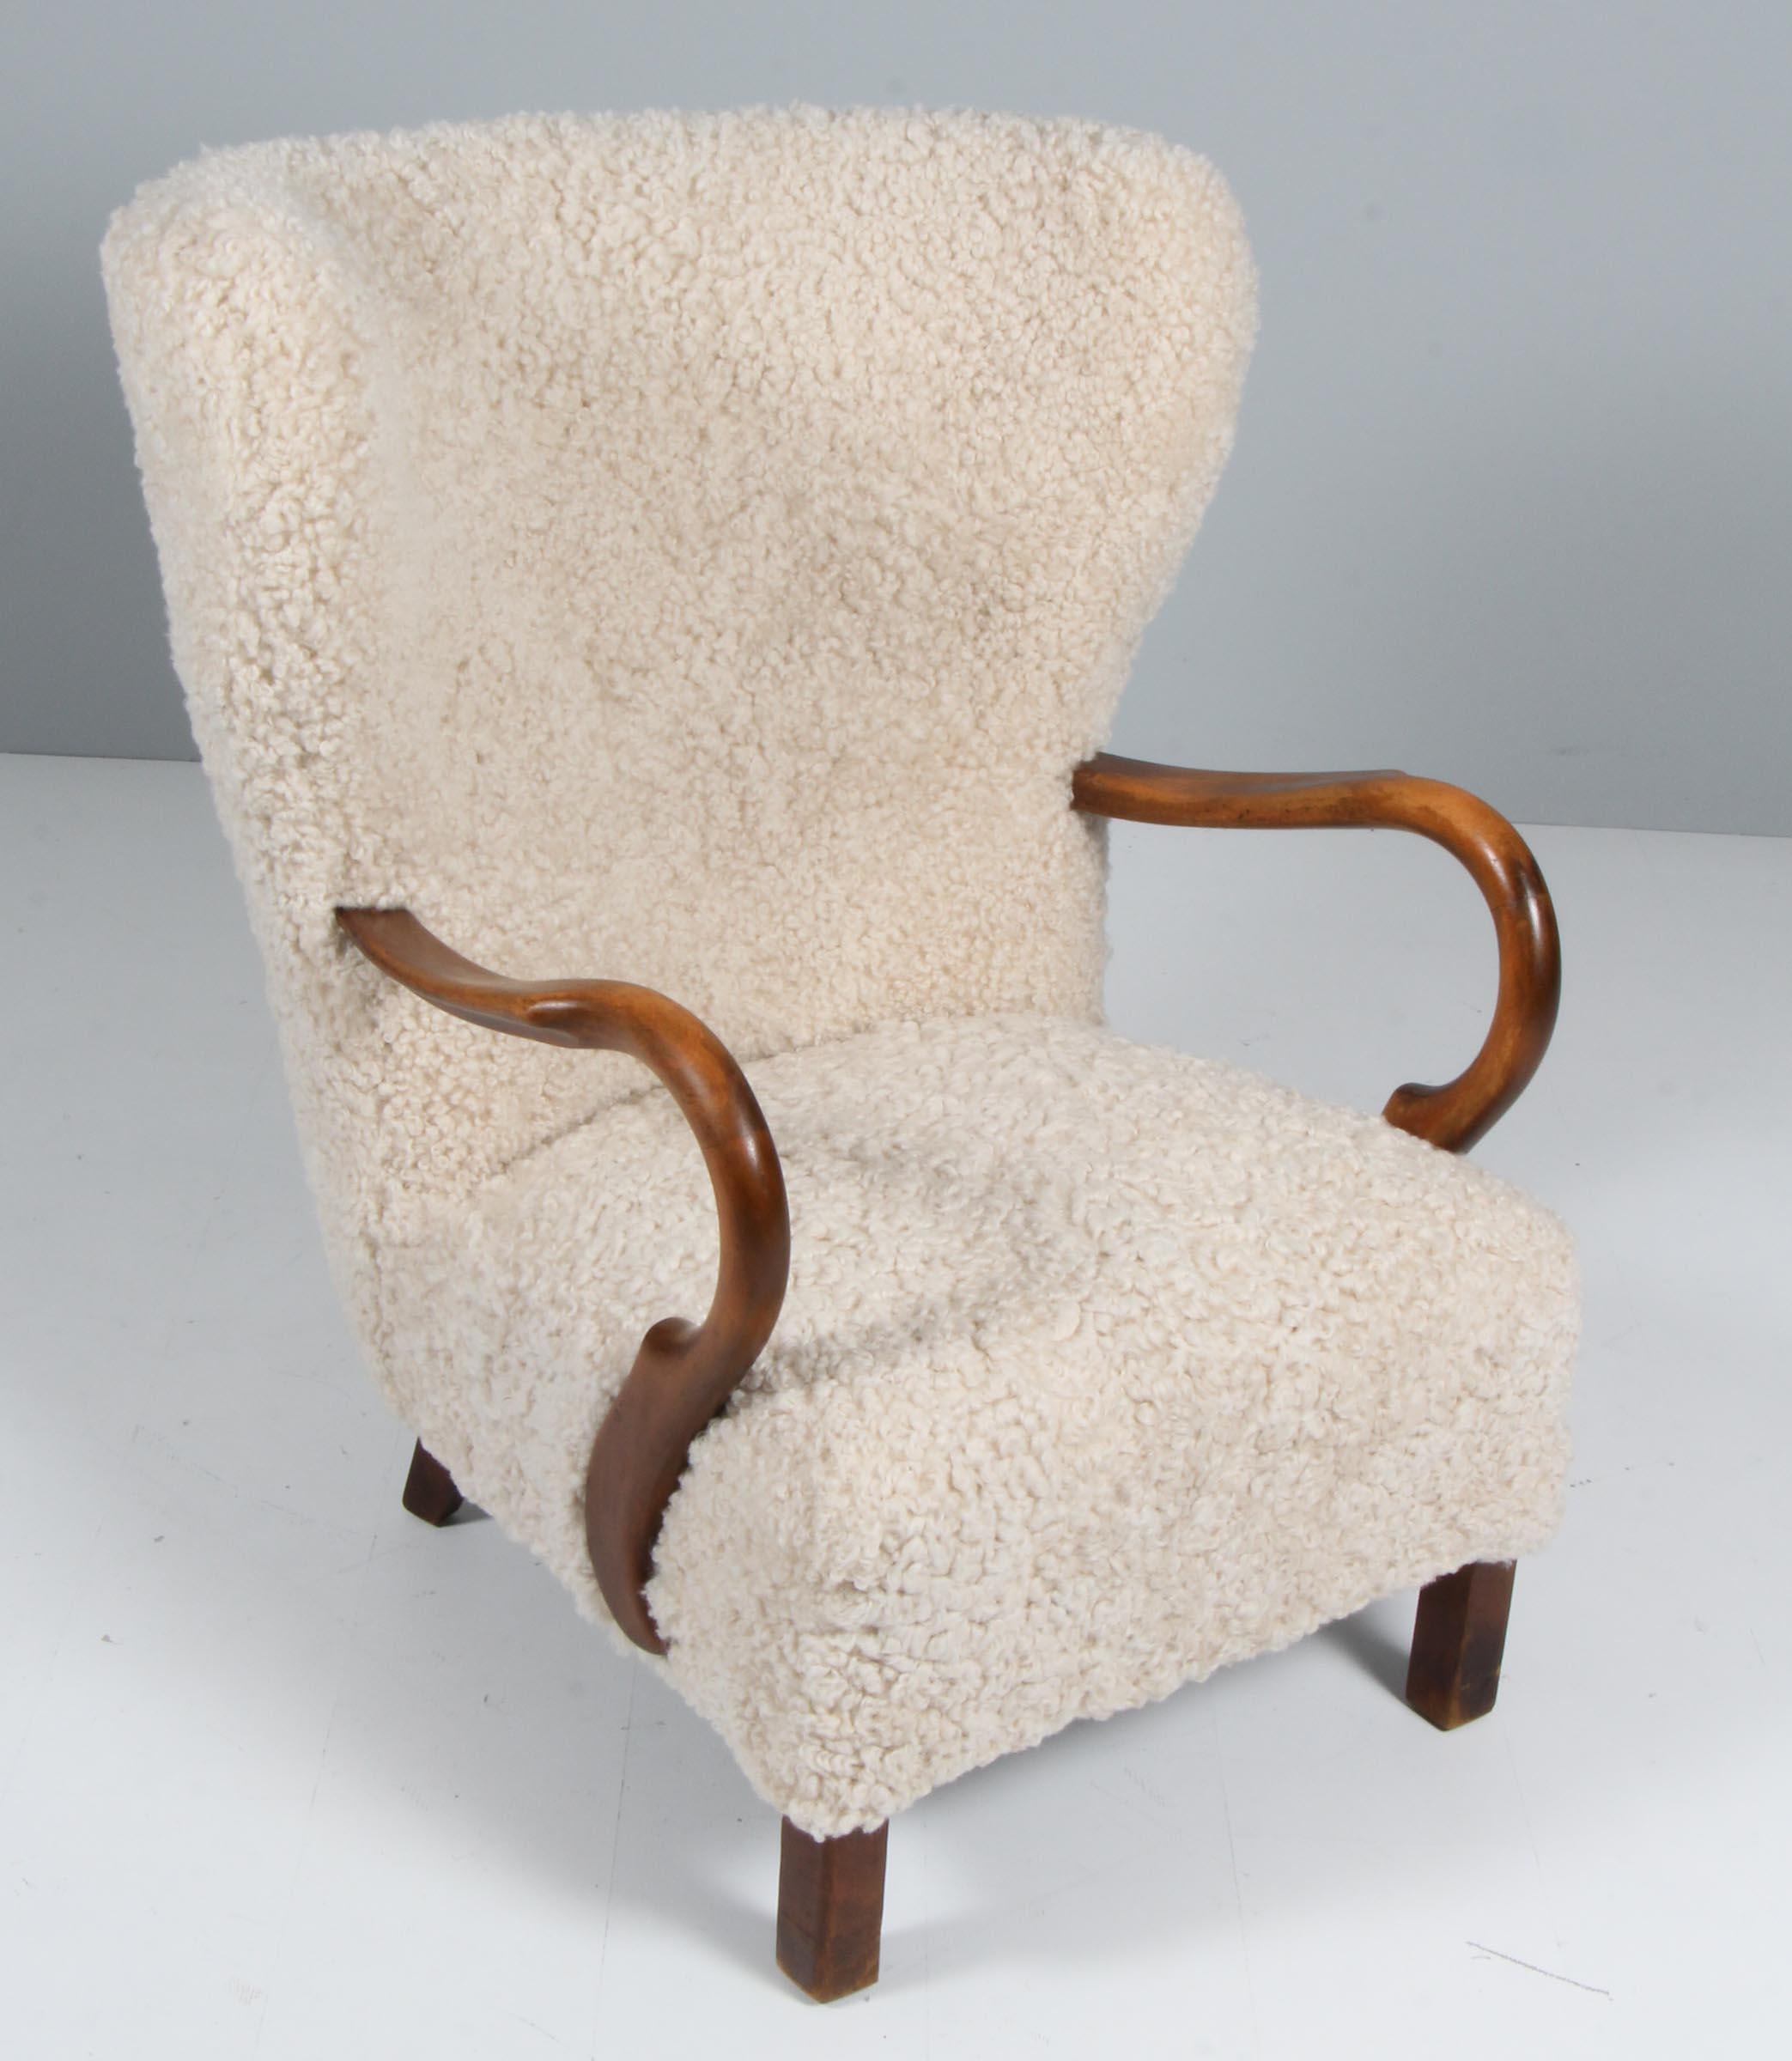 Danish cabinetmaker lounge chair new upholstered with lambskin.

Legs of stained beech.

Made in the 1940s.